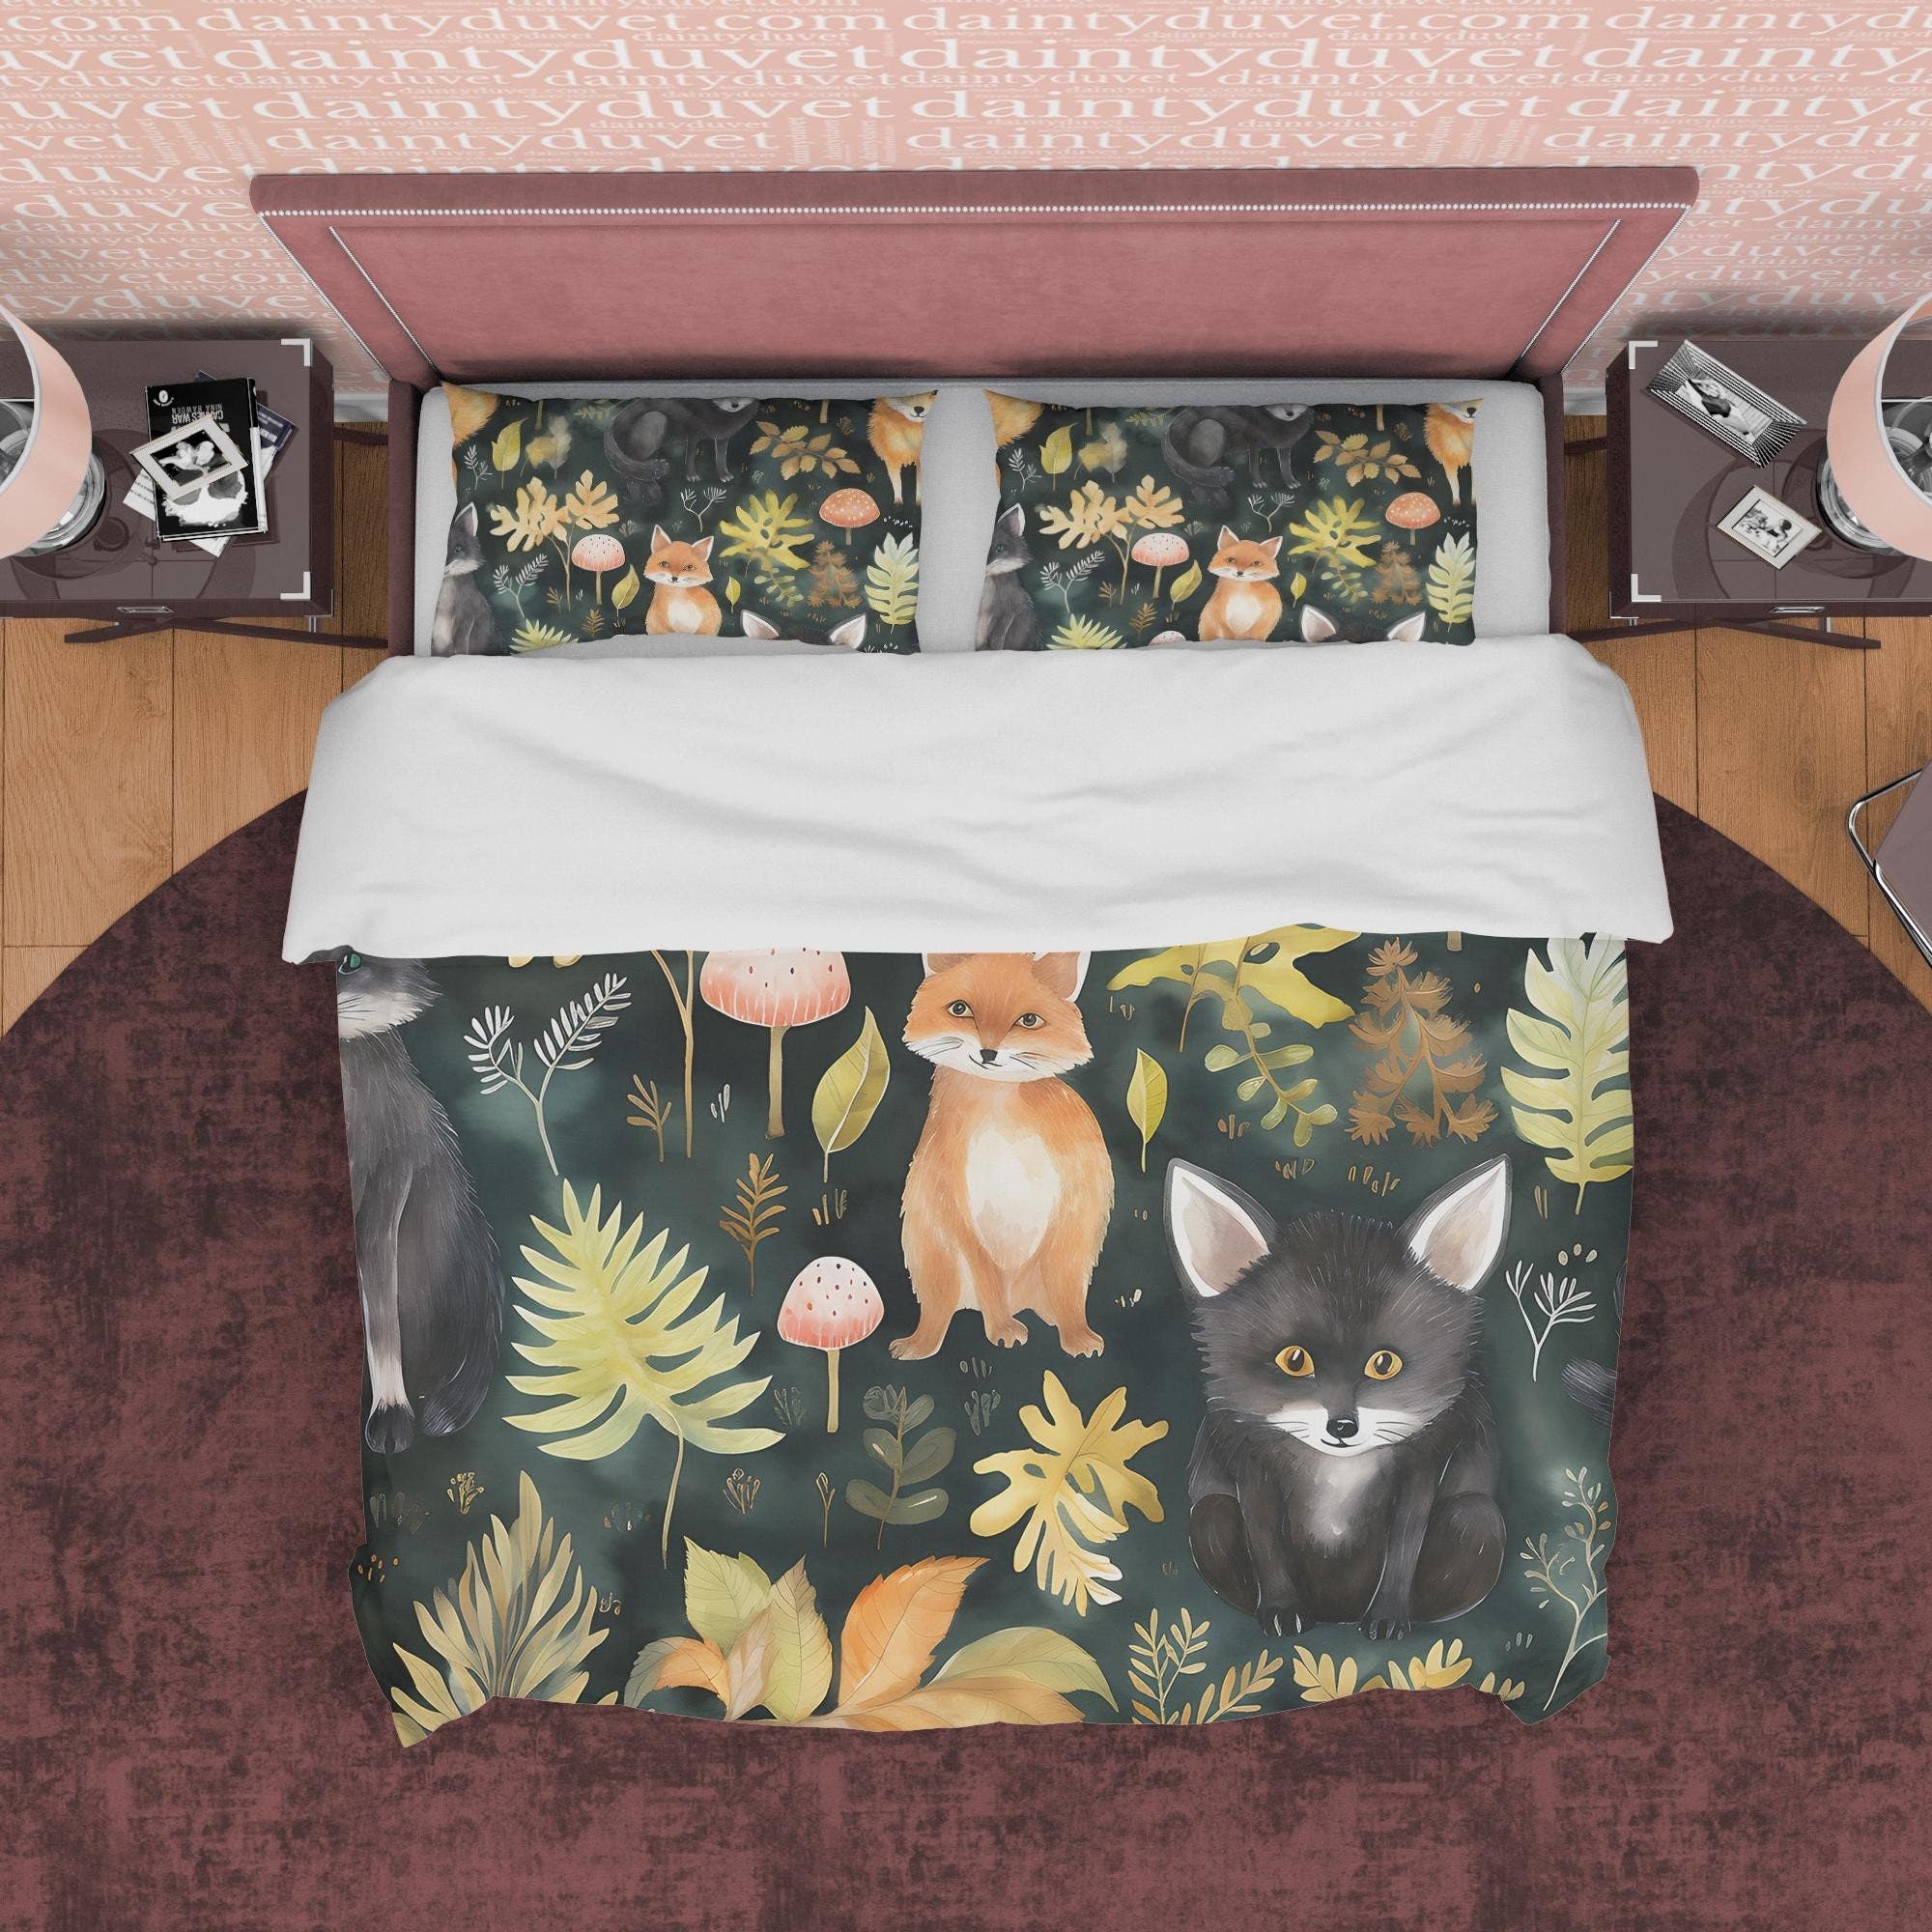 Red Fox Jungle Duvet Cover Set, Black Cat Forest Plant Quilt Cover Aesthetic Zipper Bedding, Halloween Room Decor, Green Leaf Bed Cover